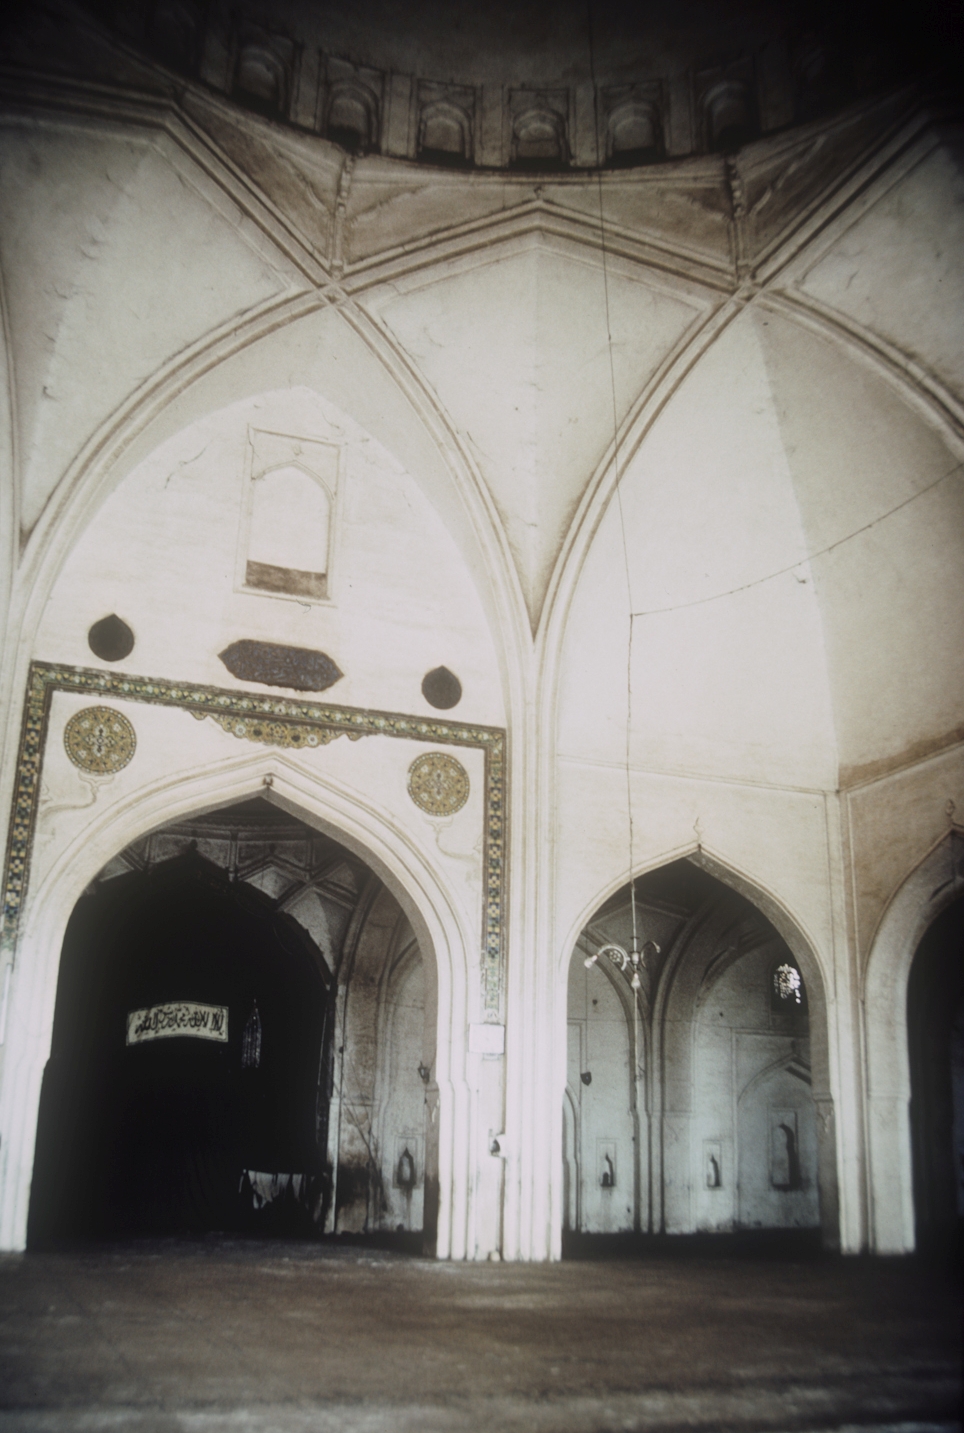 Central mihrab. Intersecting arches supporting dome above